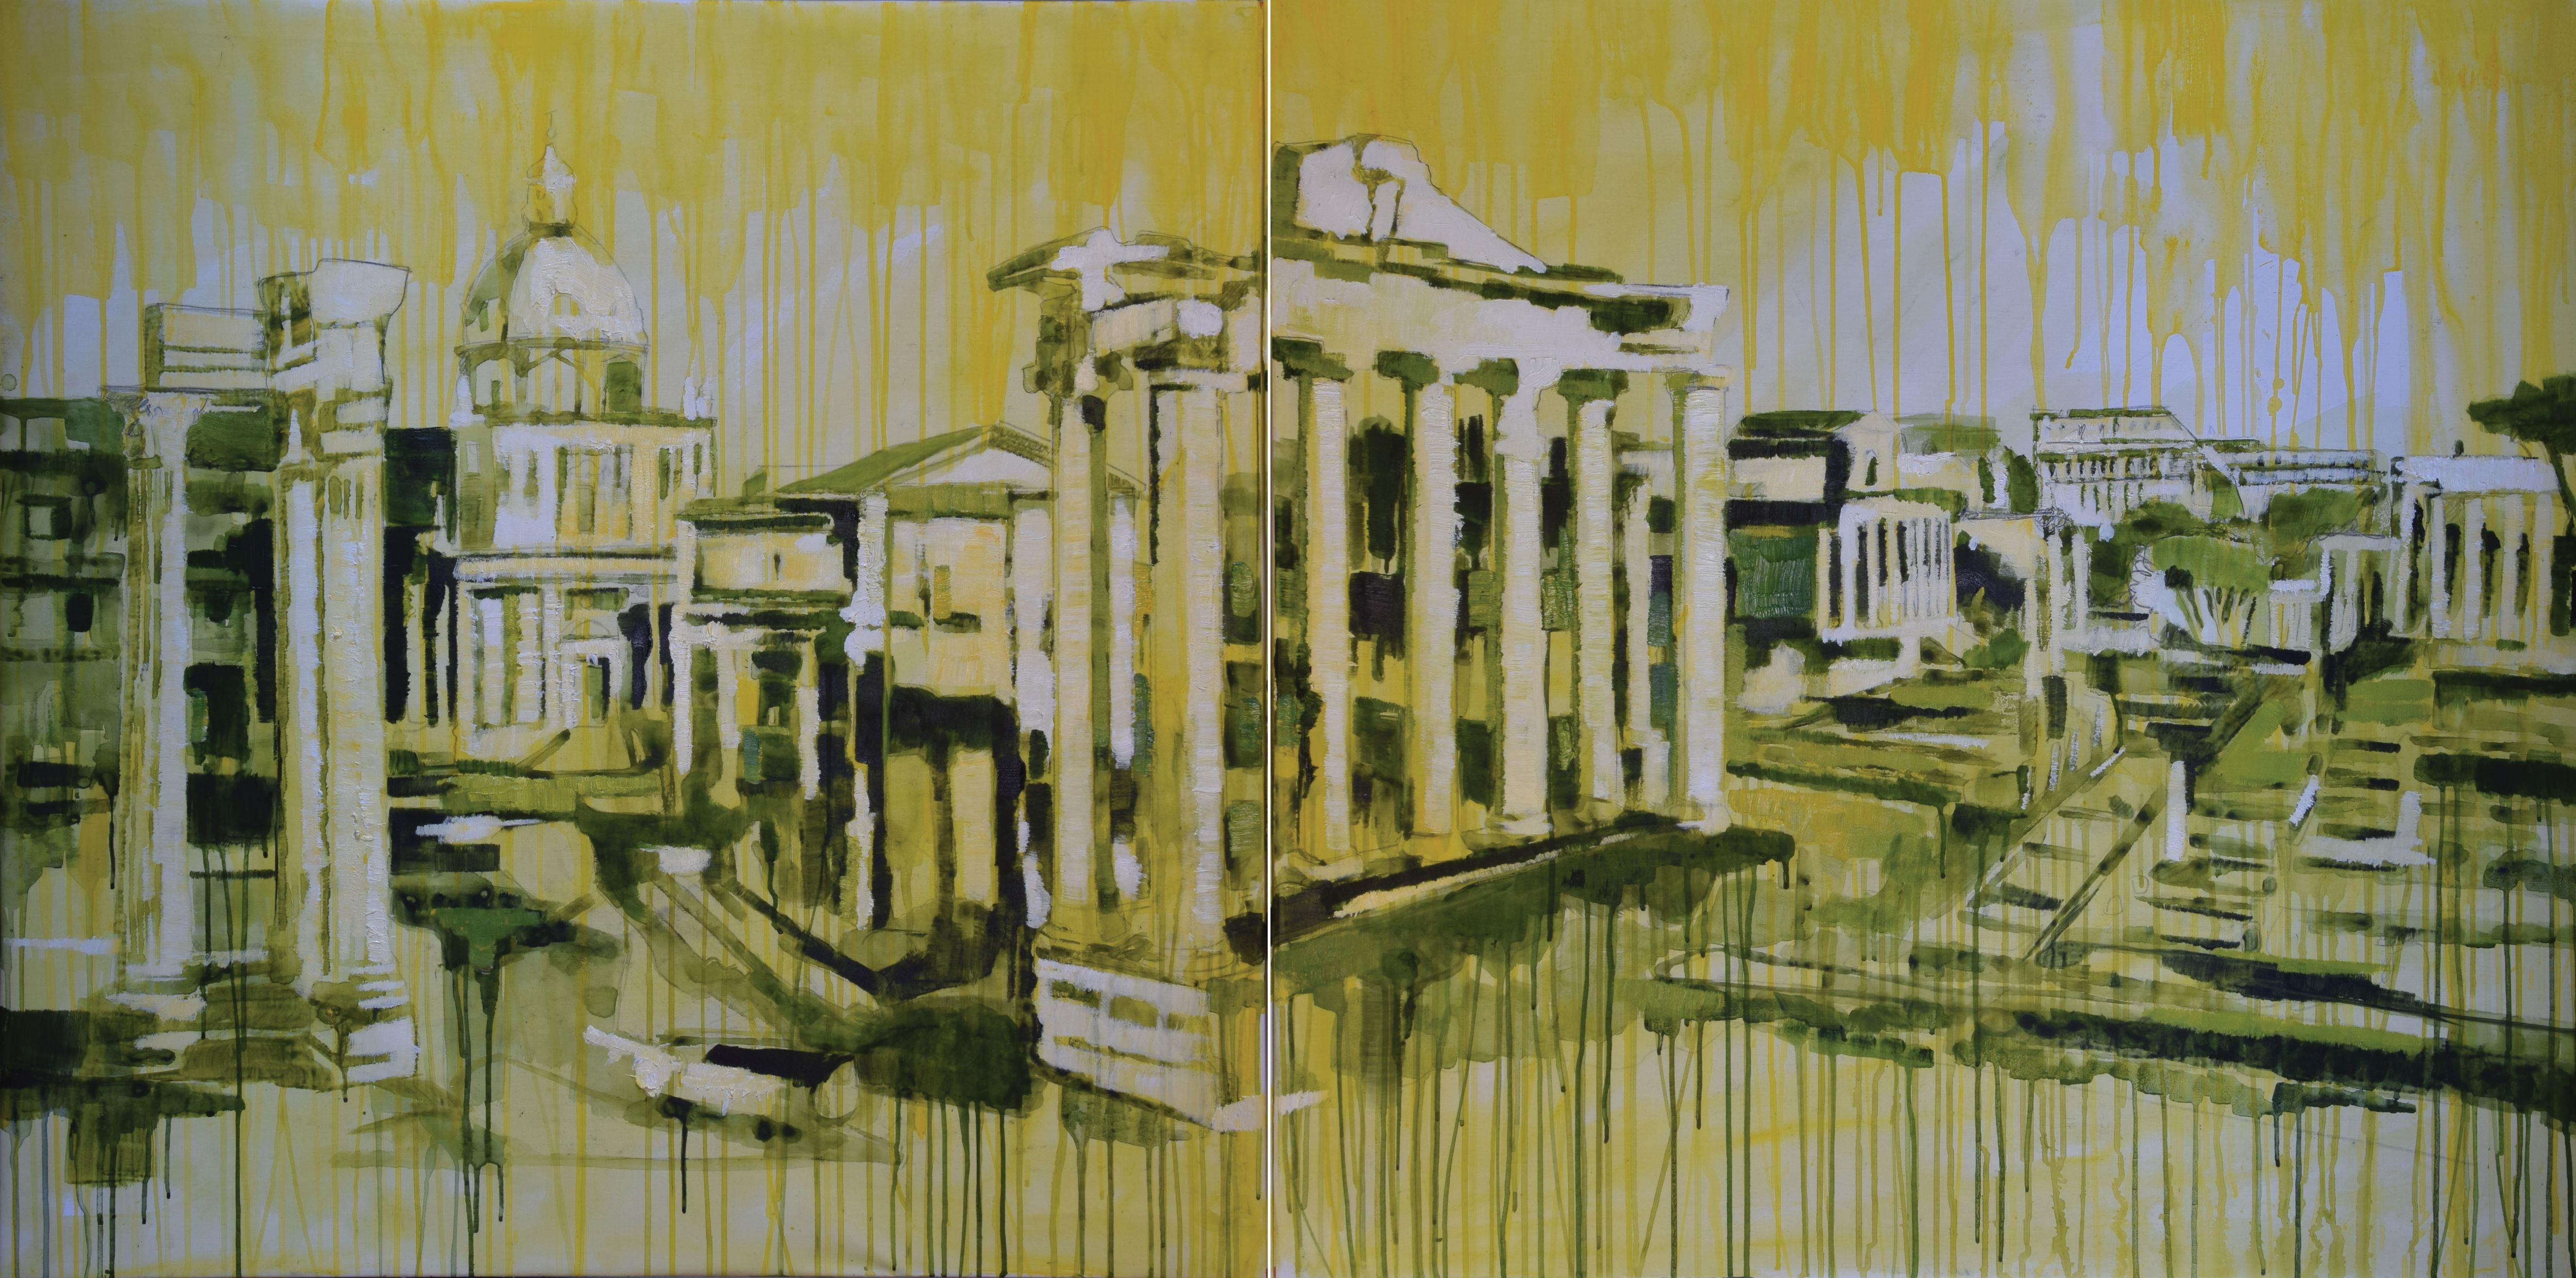 Fori Imperiali Roma 012 - Brown Landscape Painting by Laura Federici